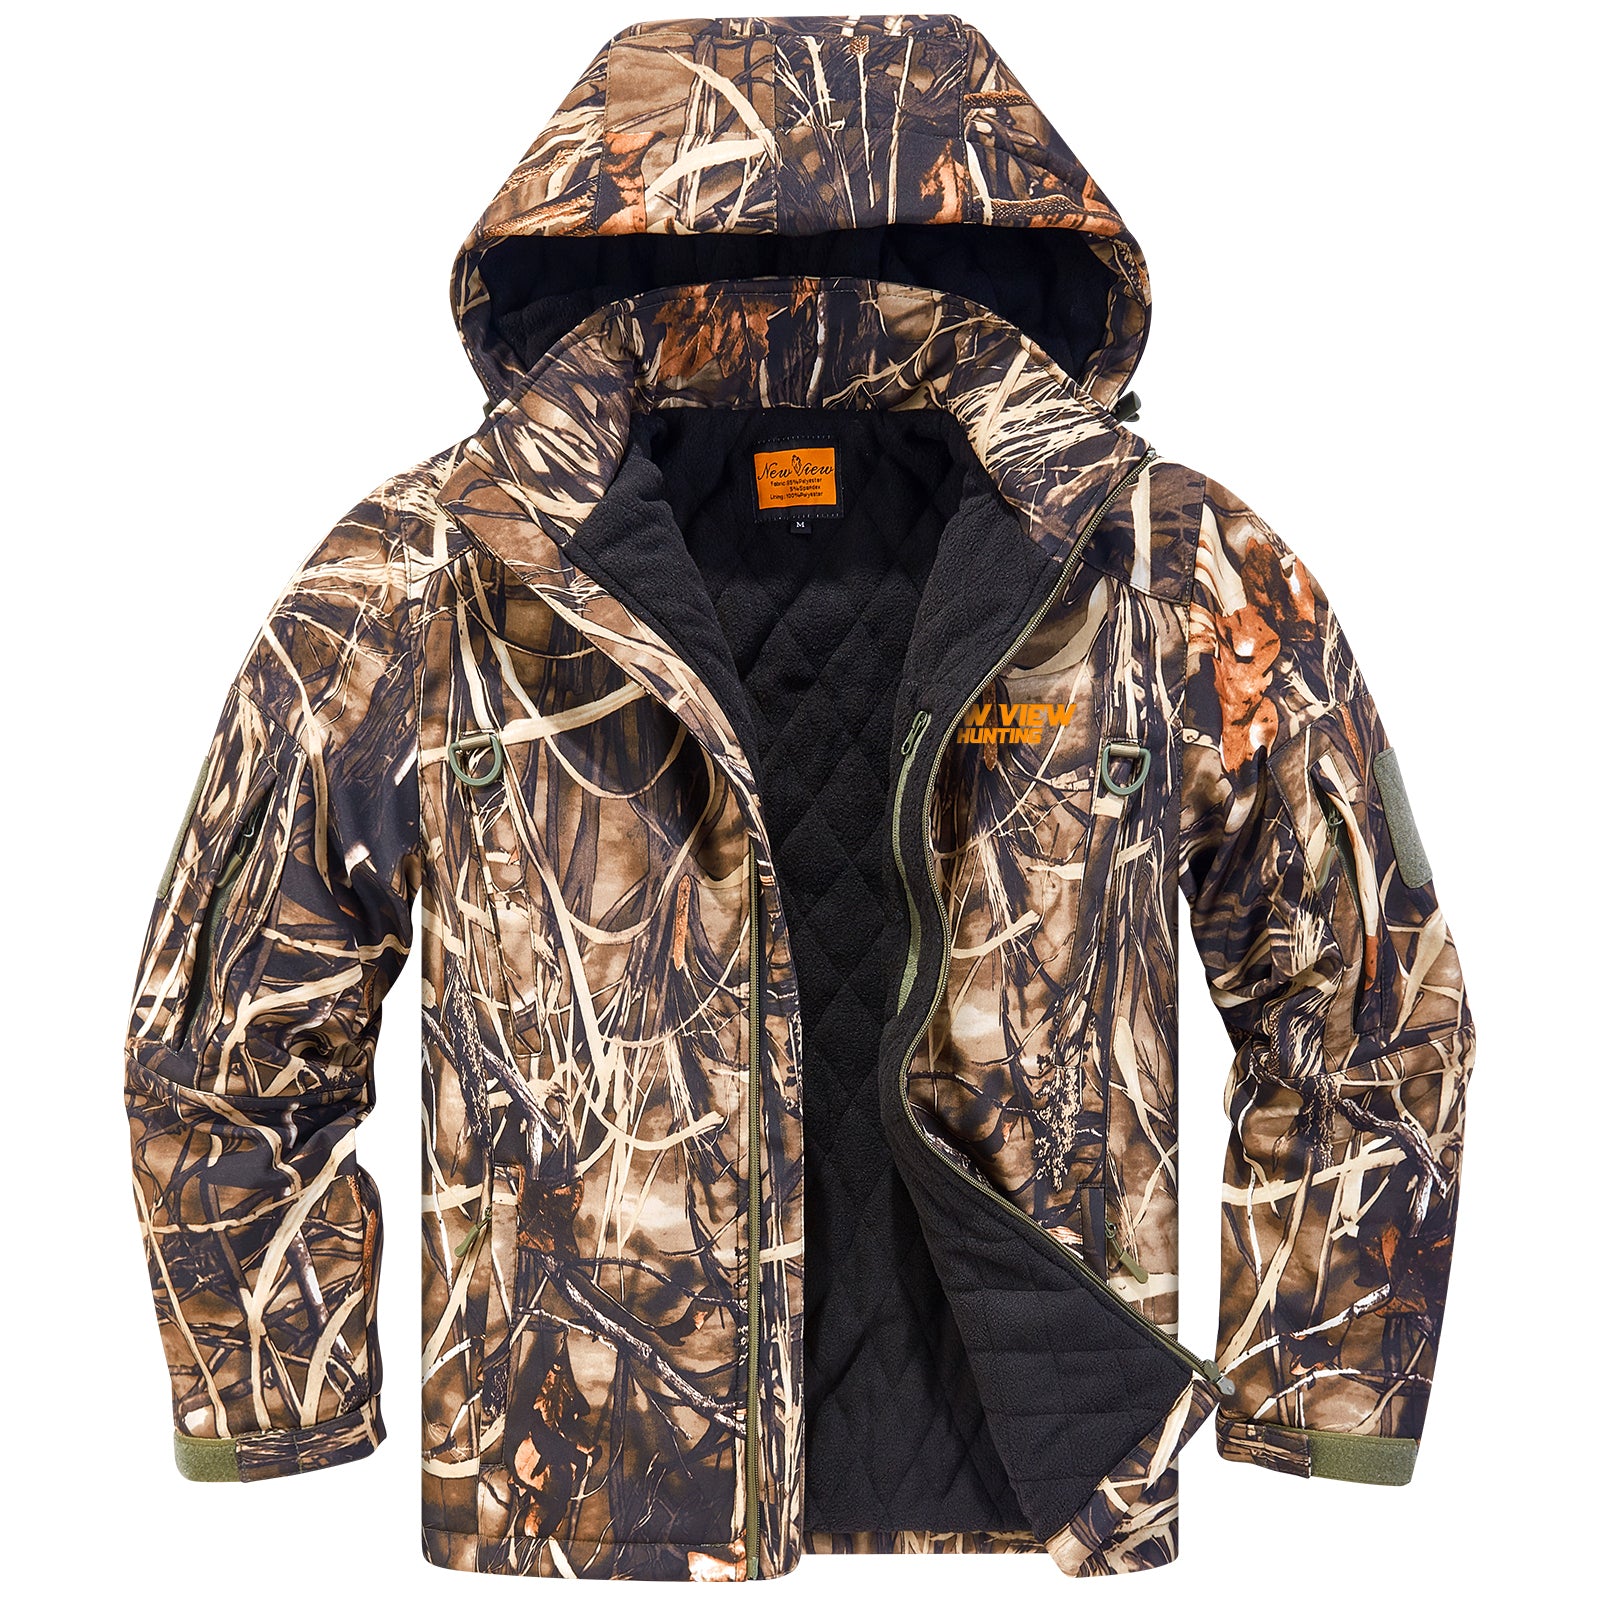 Camo Tree Insulated Jacket for Men